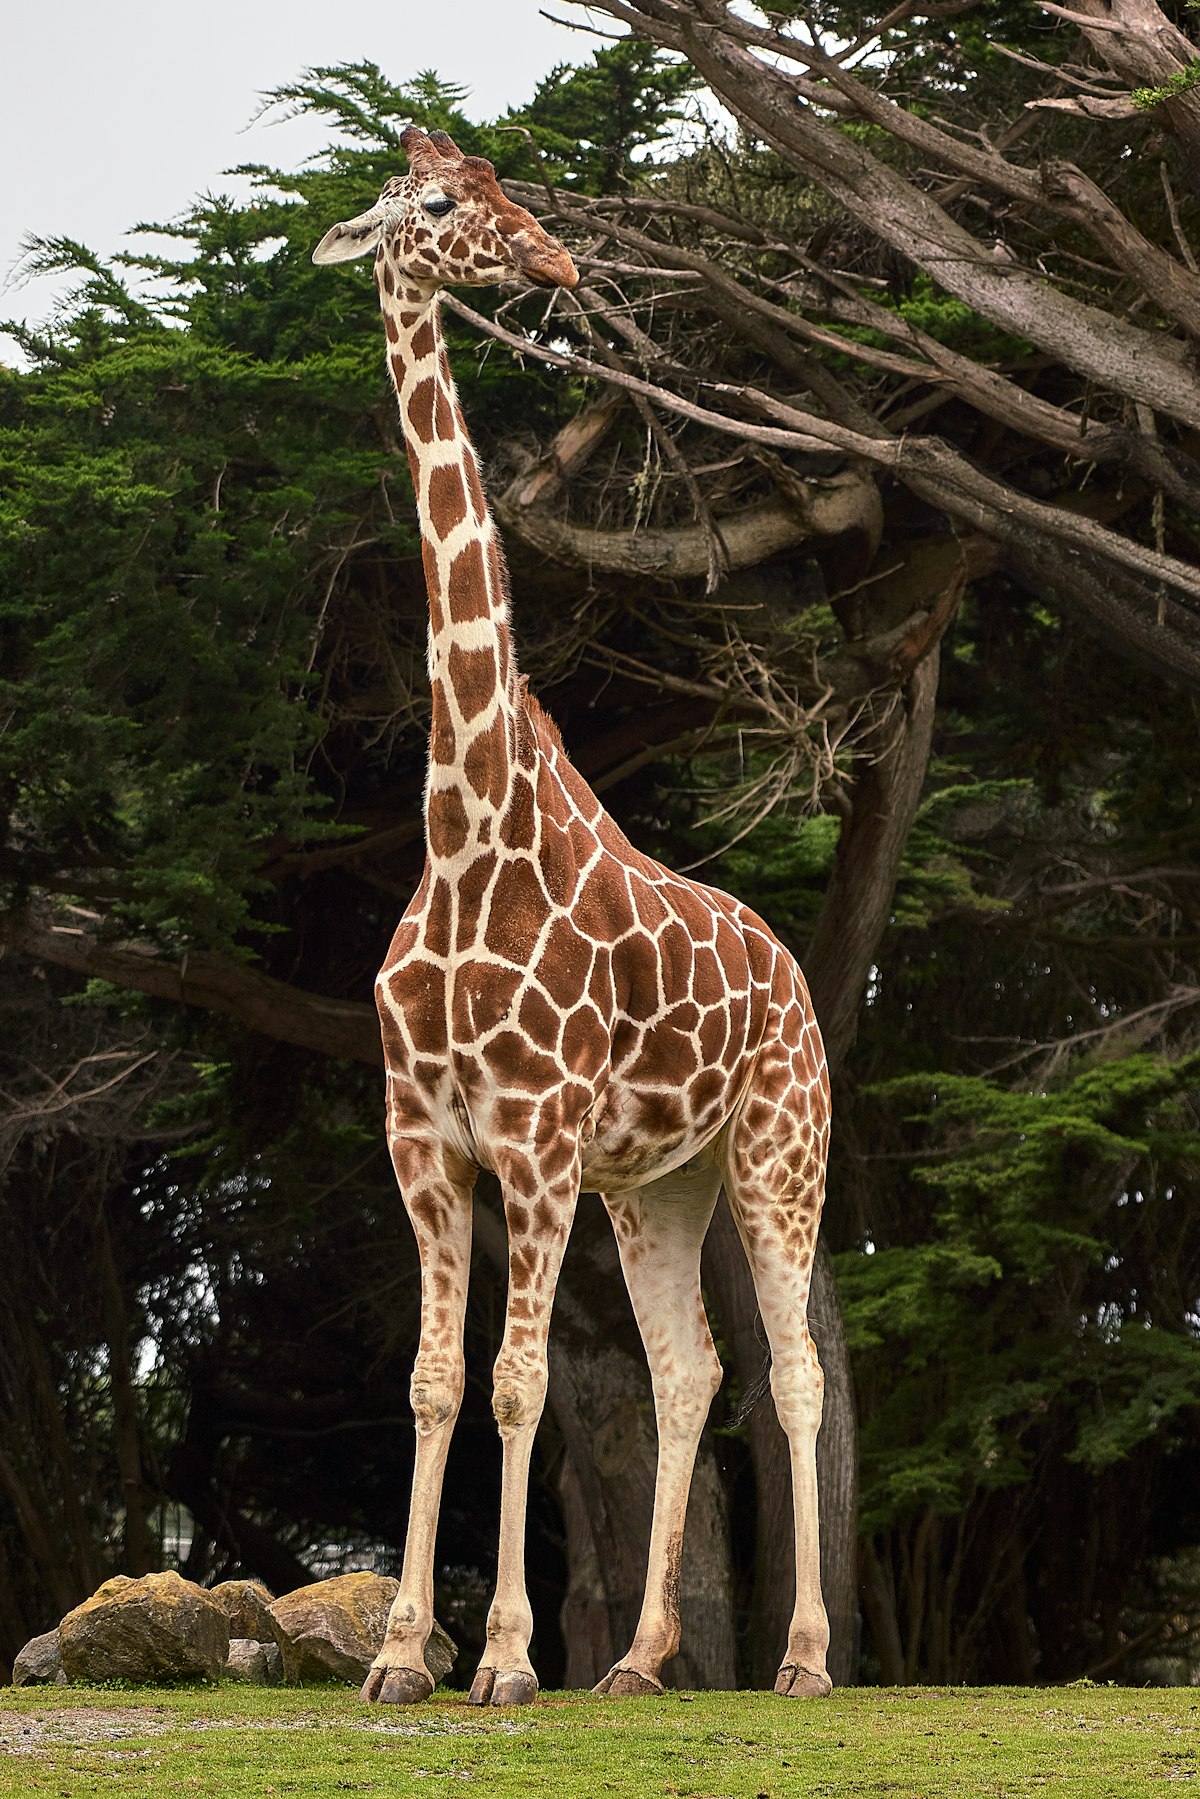 Join Hunter's Ark in Protecting the Majestic Giraffes and Saving Their Habitat